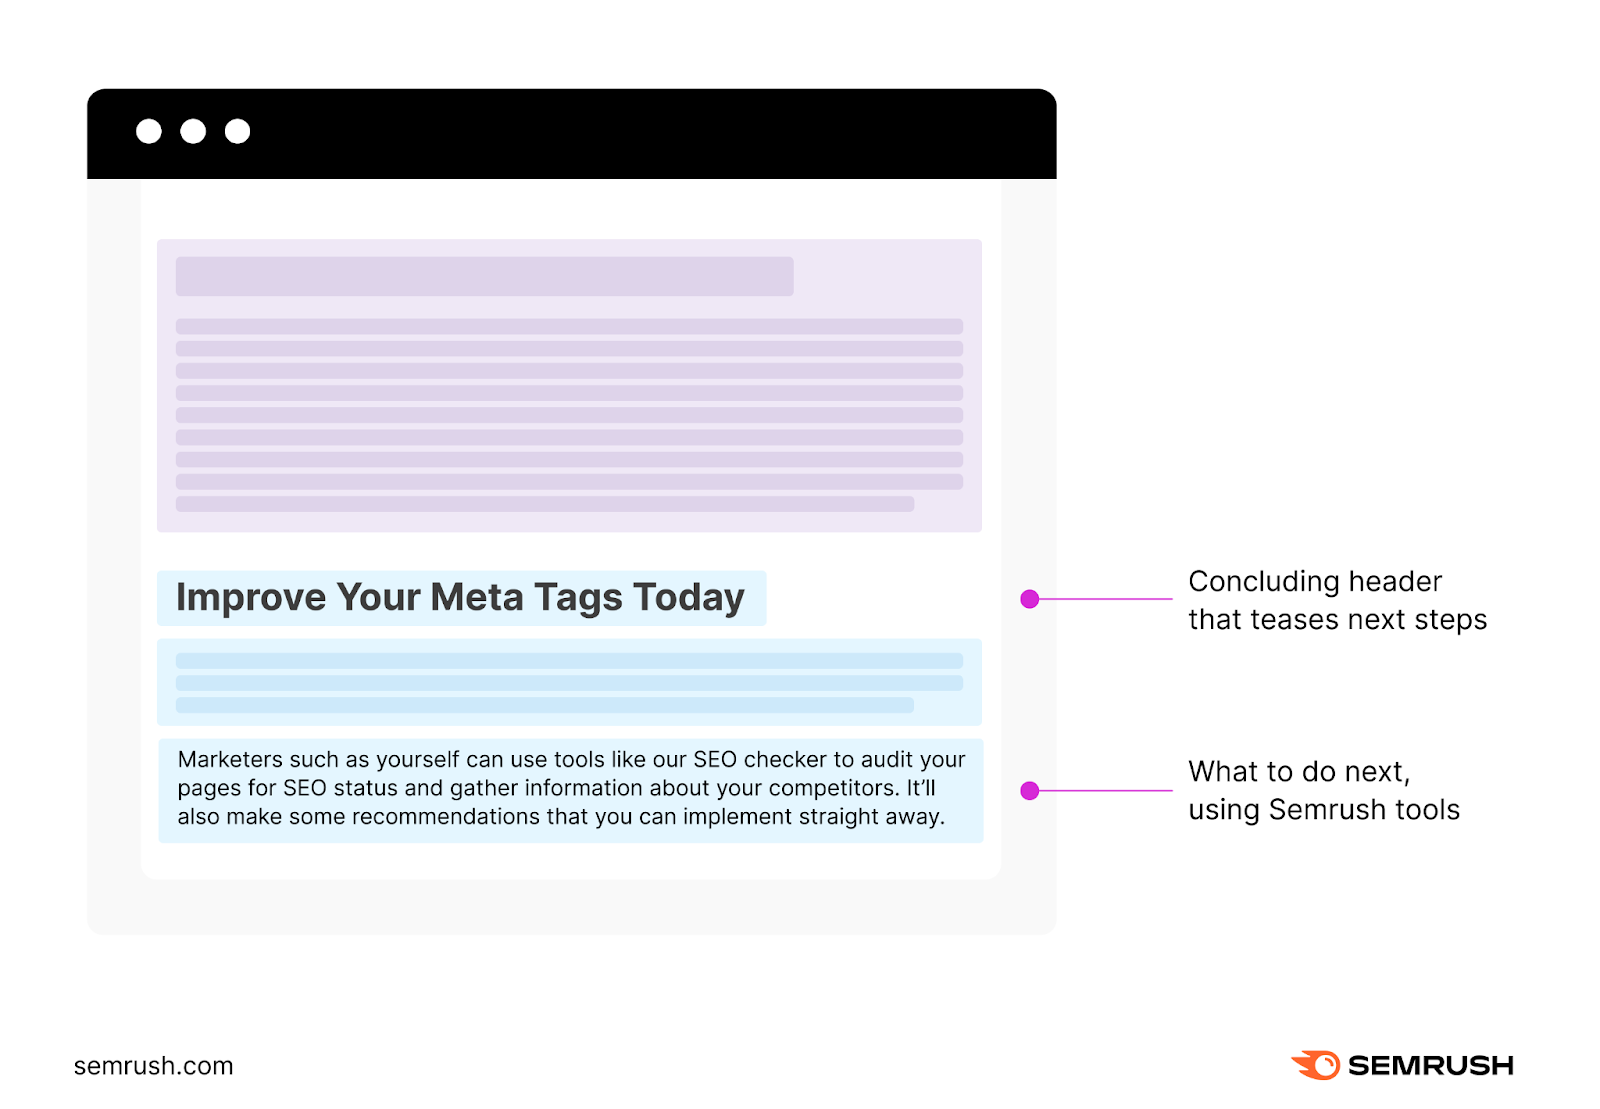 An infographic highlighting elements of “Improve Your Meta Tags Today” conclusion section